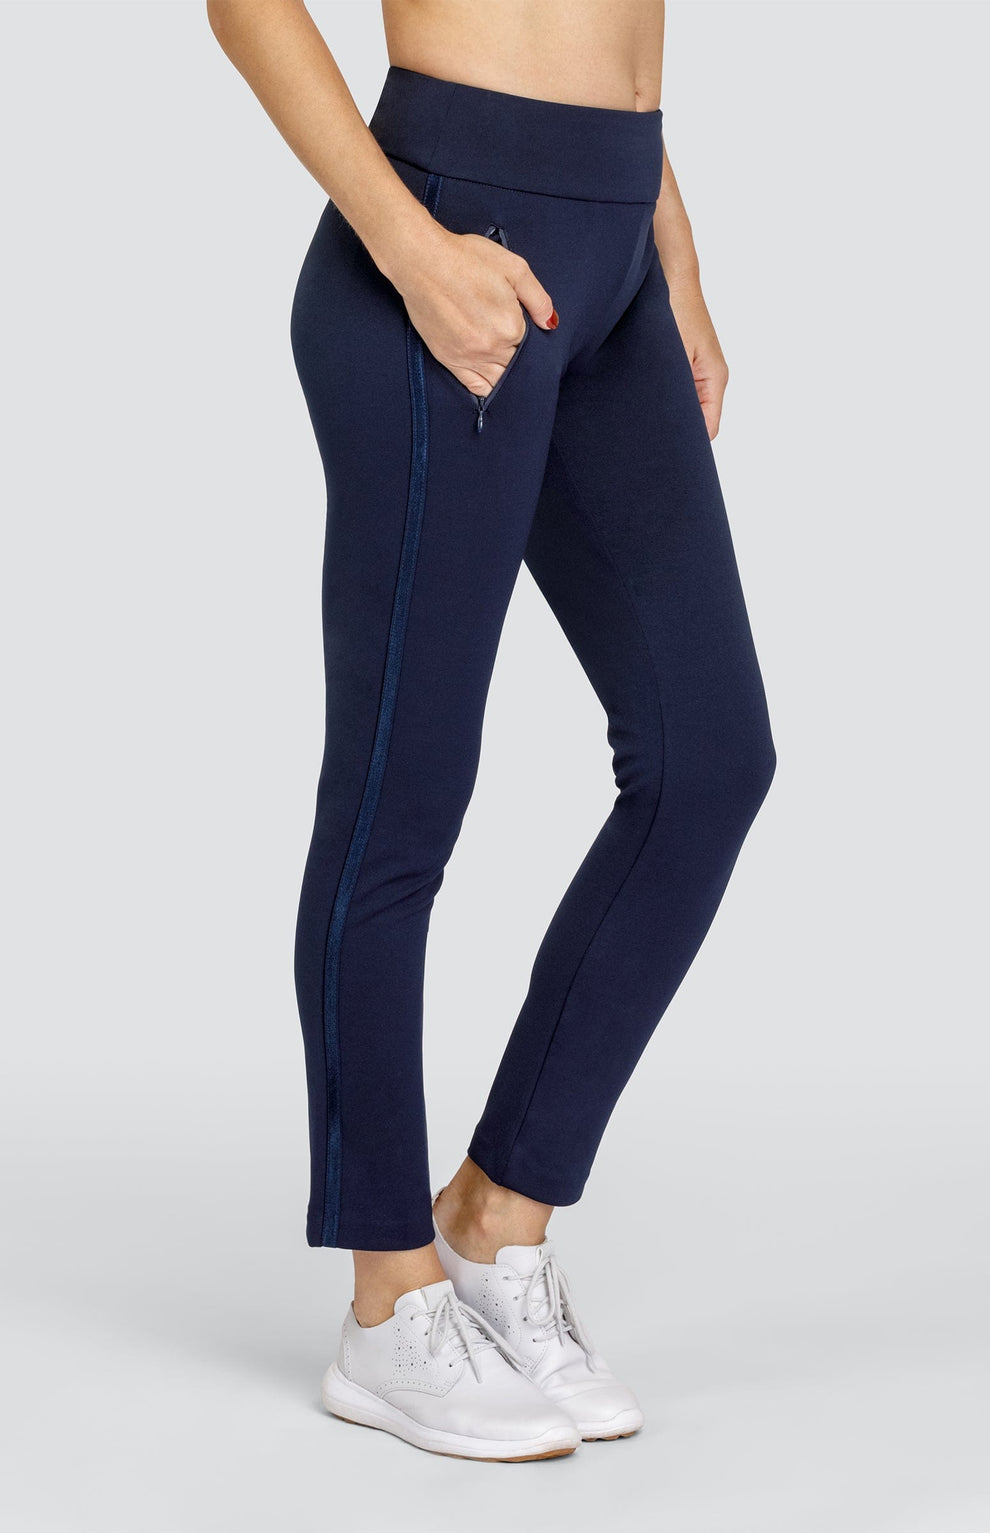 Aubrianna 28 Ankle Pant - Night Navy